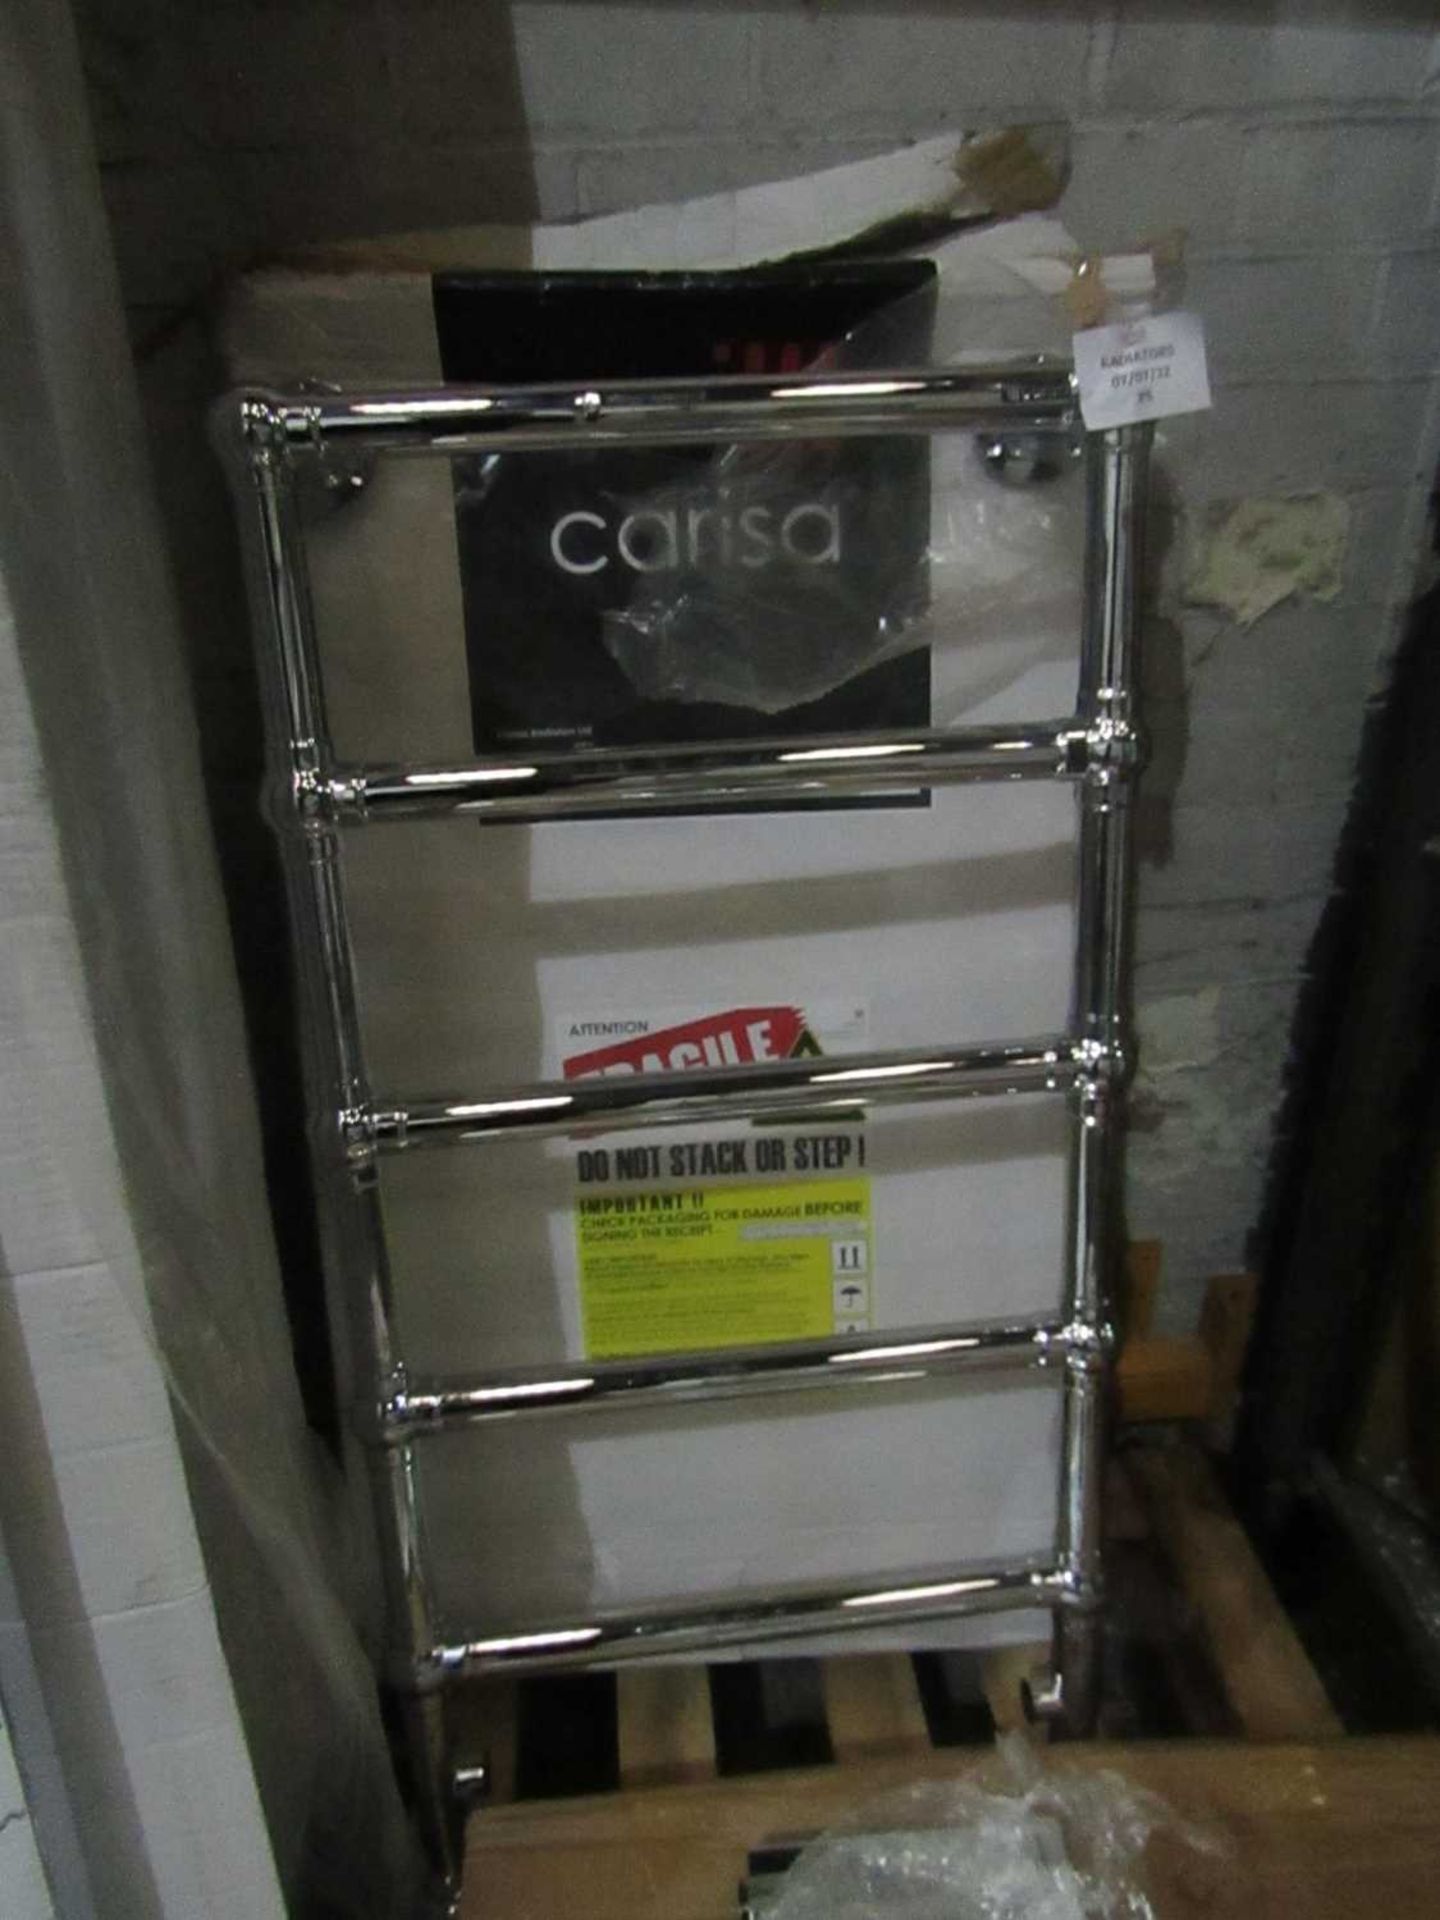 Carisa - Bacchus Floor Mounted Towel Radiator - 500x950mm - Item Appears to be in Good Condition &